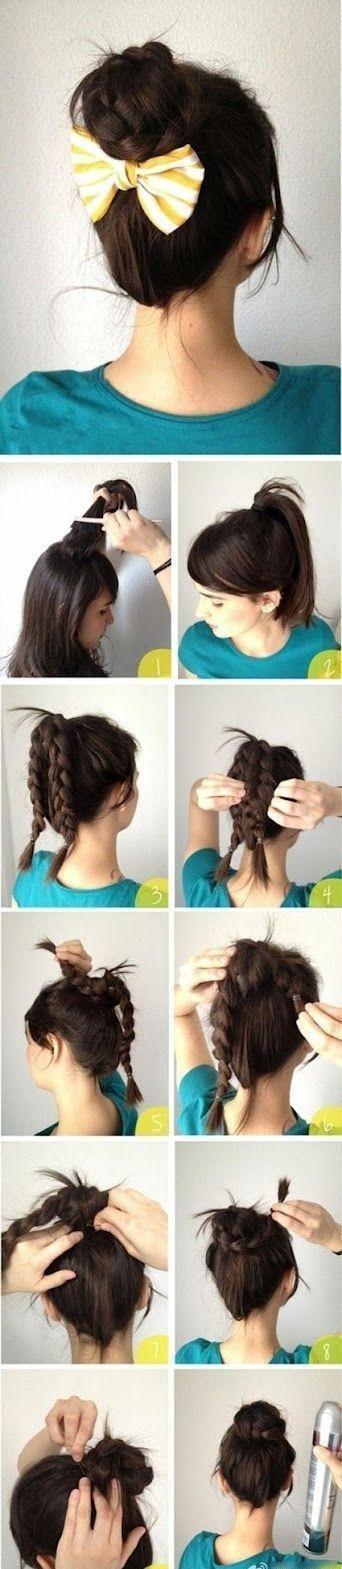 Simple easy to do hairstyles simple-easy-to-do-hairstyles-06_20